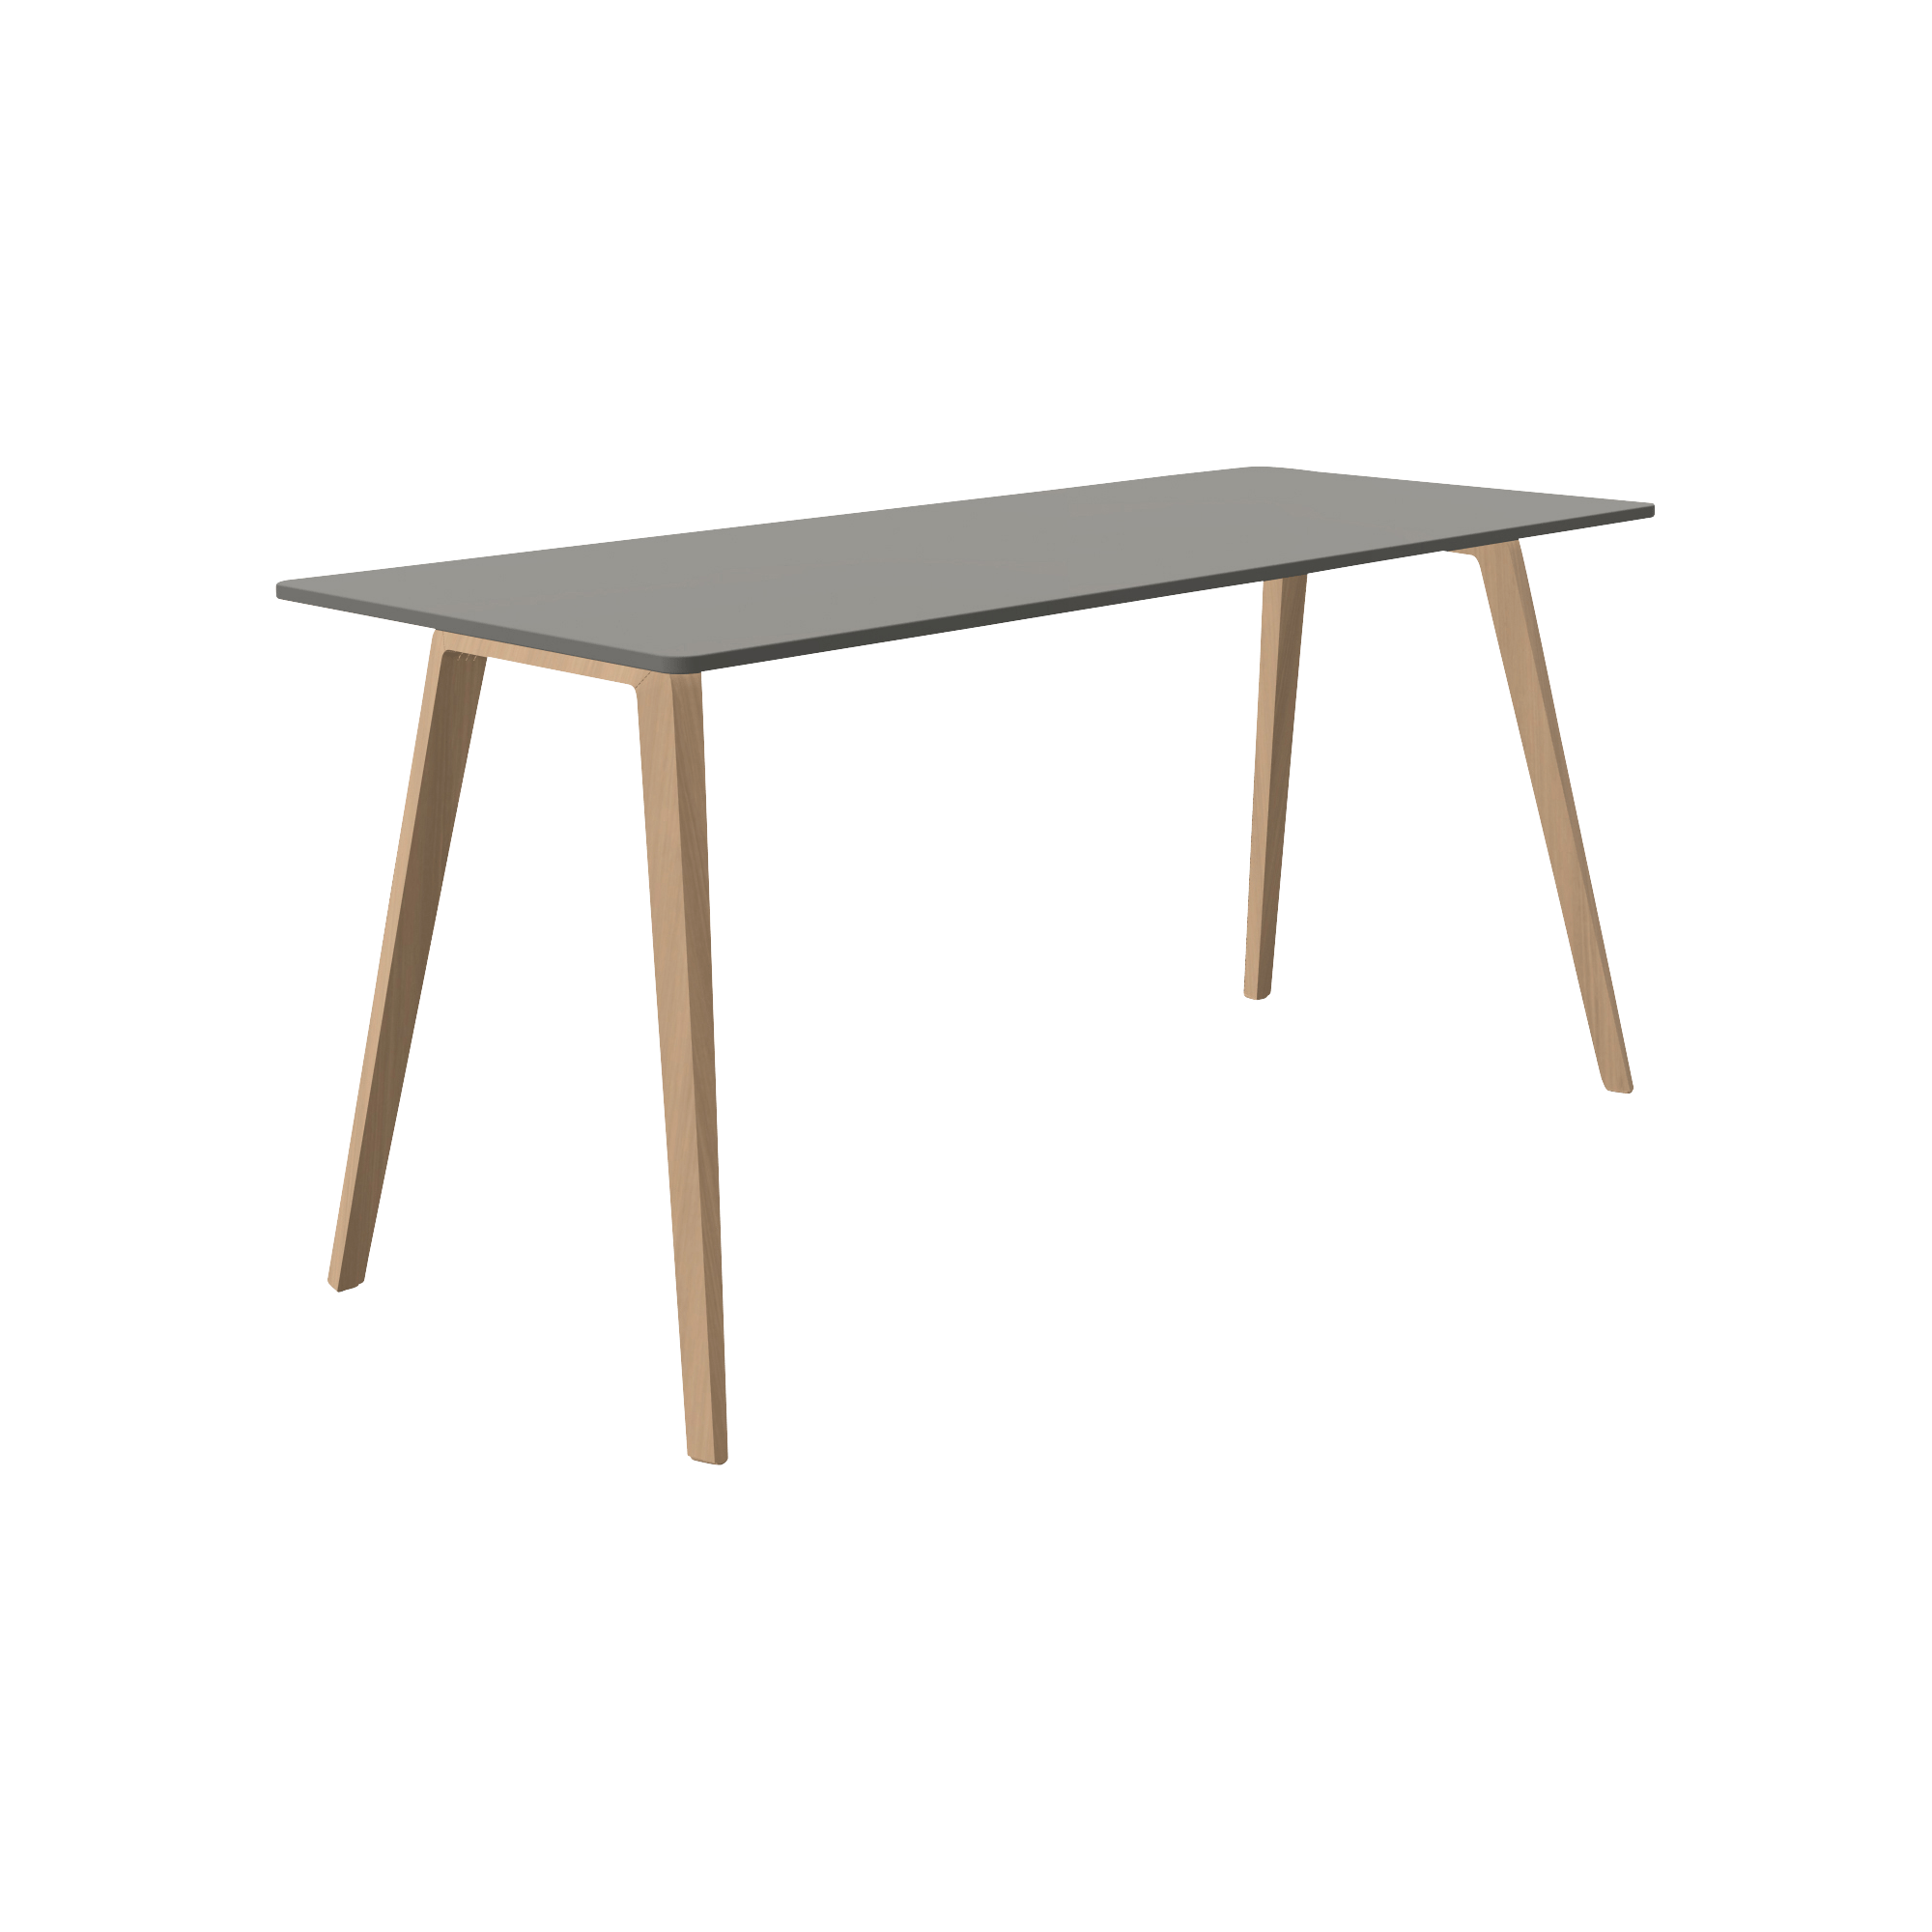 Grey, mid length rectangular table with 4 wooden legs